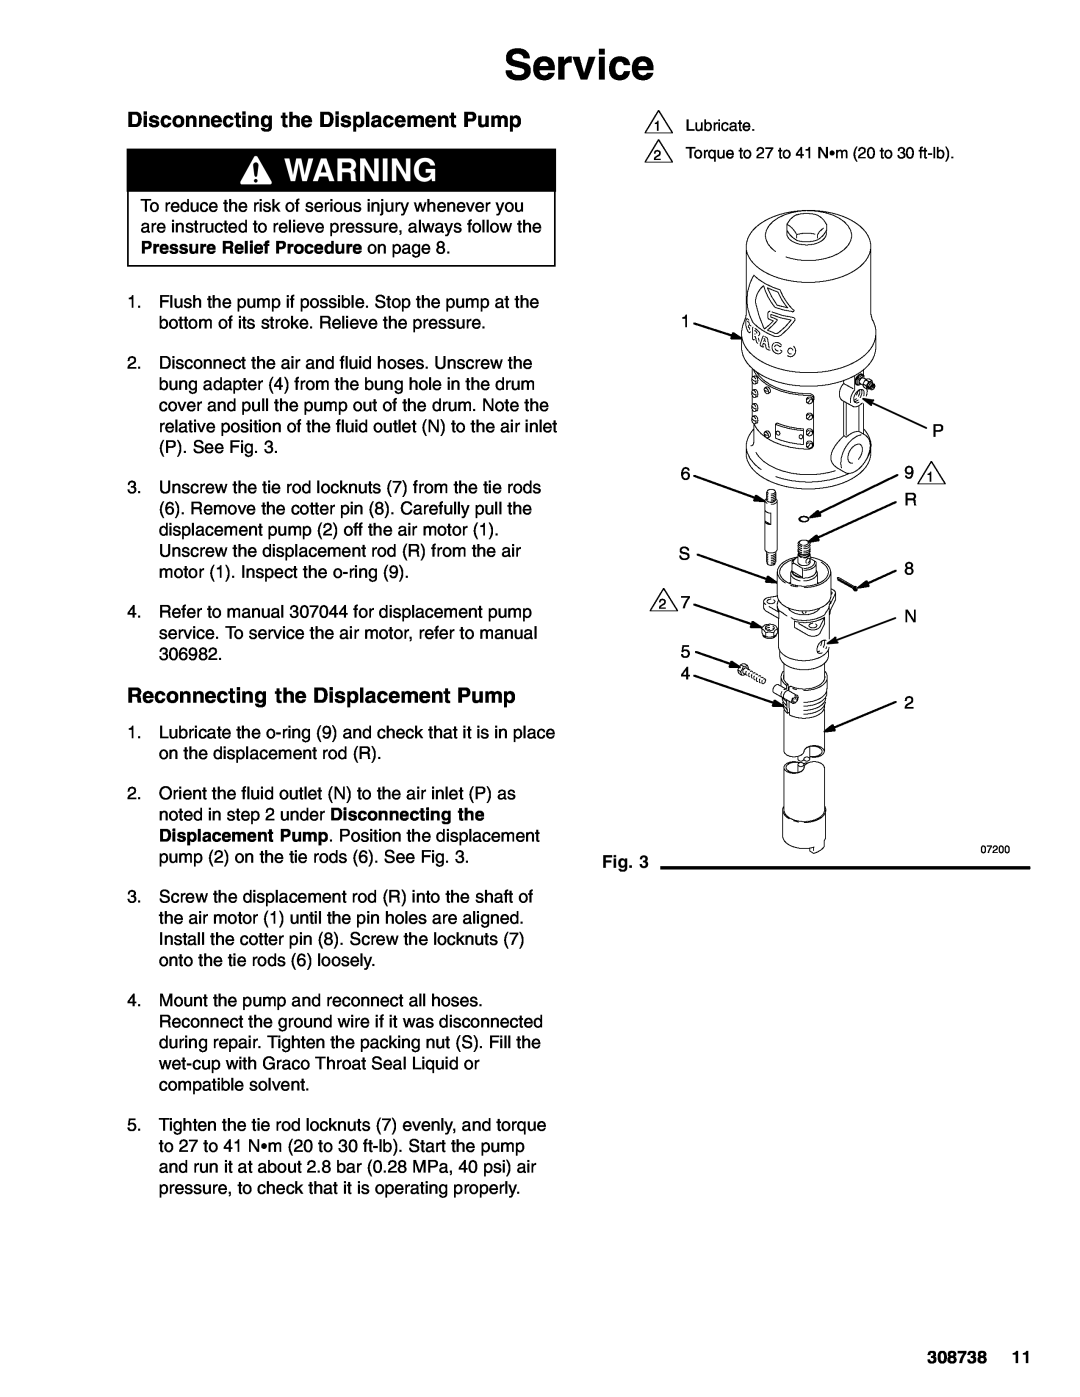 Graco 308738C manual Service, Disconnecting the Displacement Pump, Reconnecting the Displacement Pump 